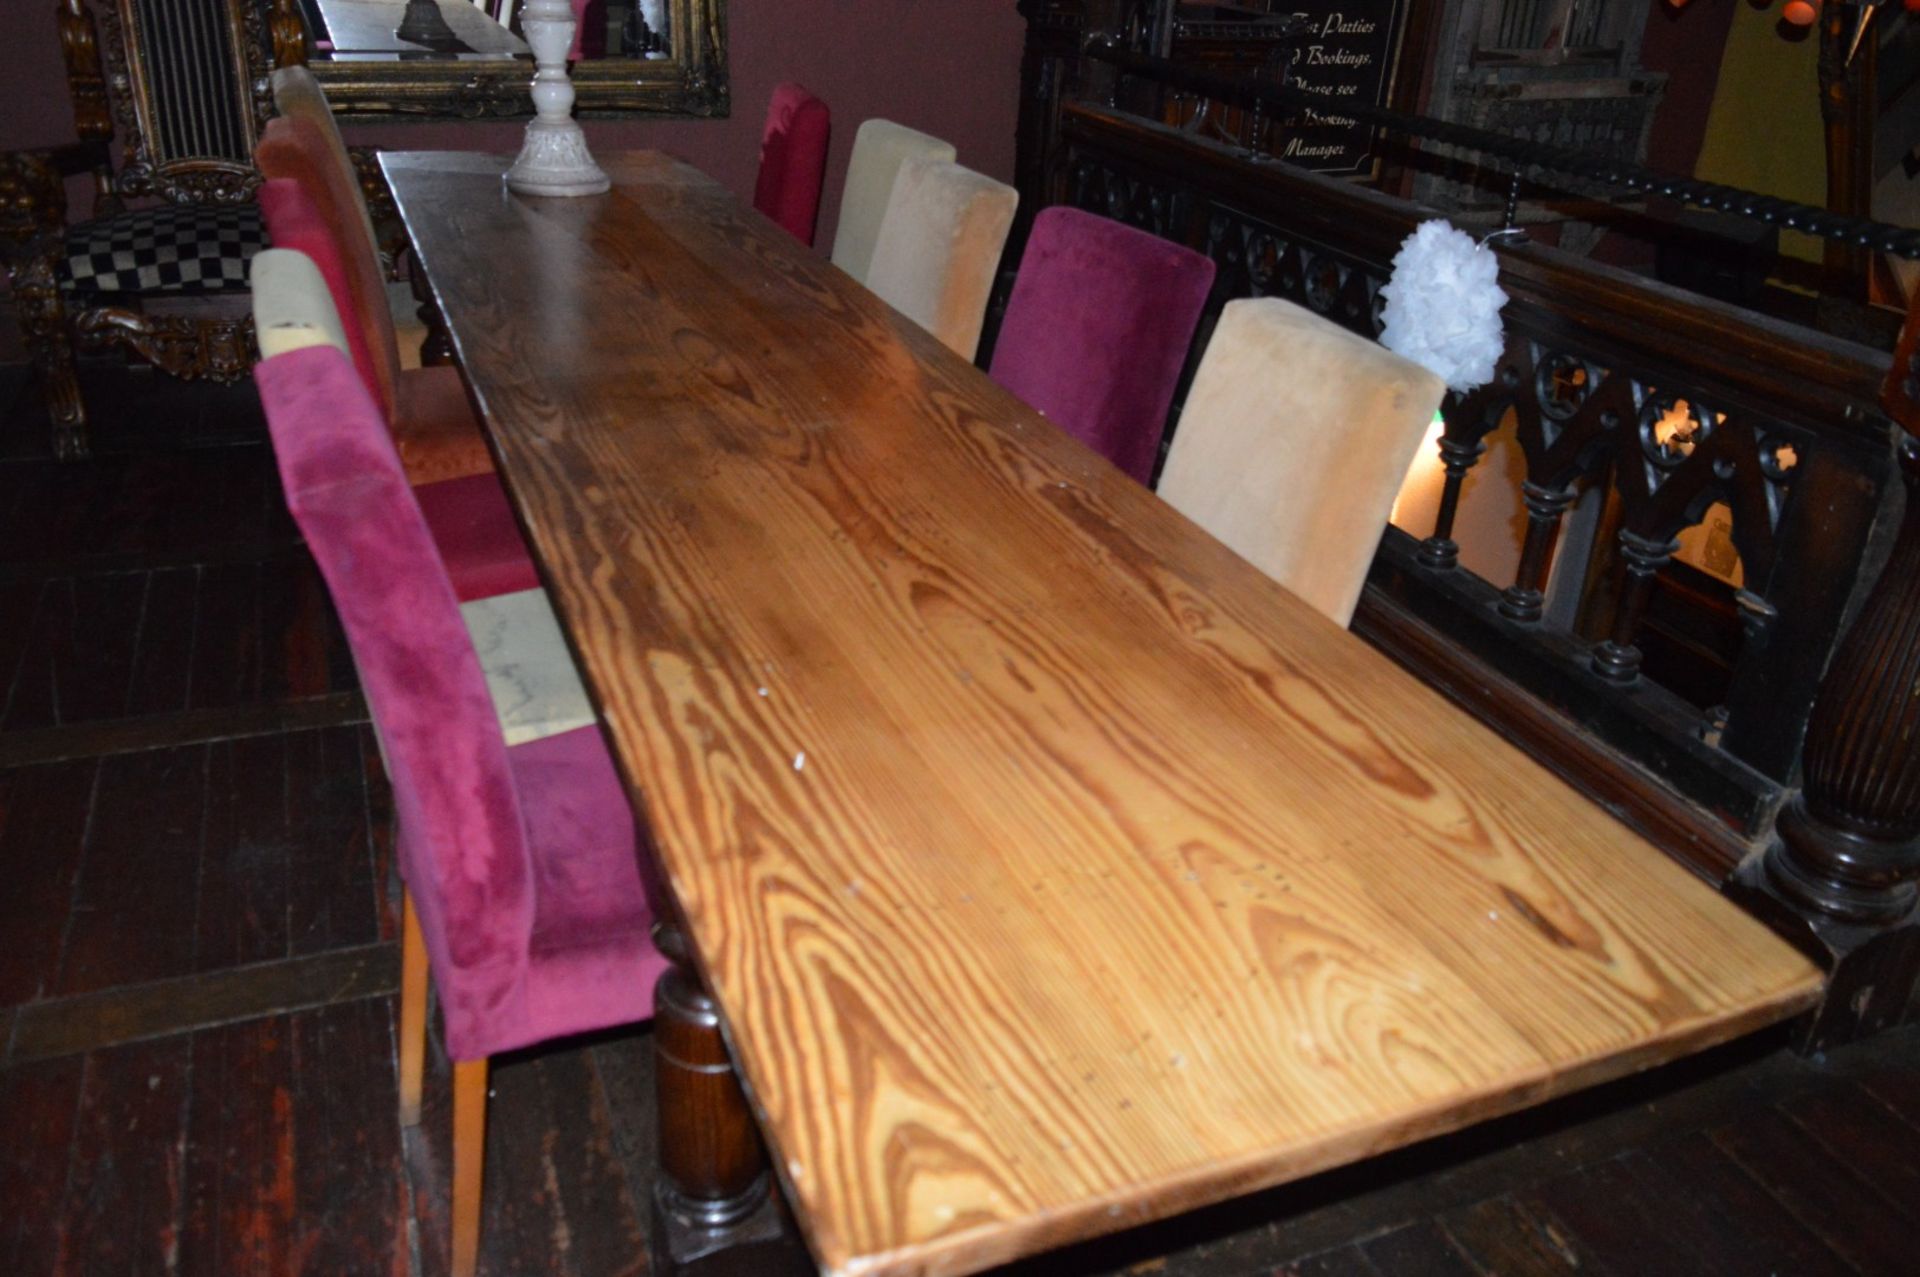 1 x Impressive Antique and Very Long Refectory Table - Features a single piece top which is full - Image 3 of 18